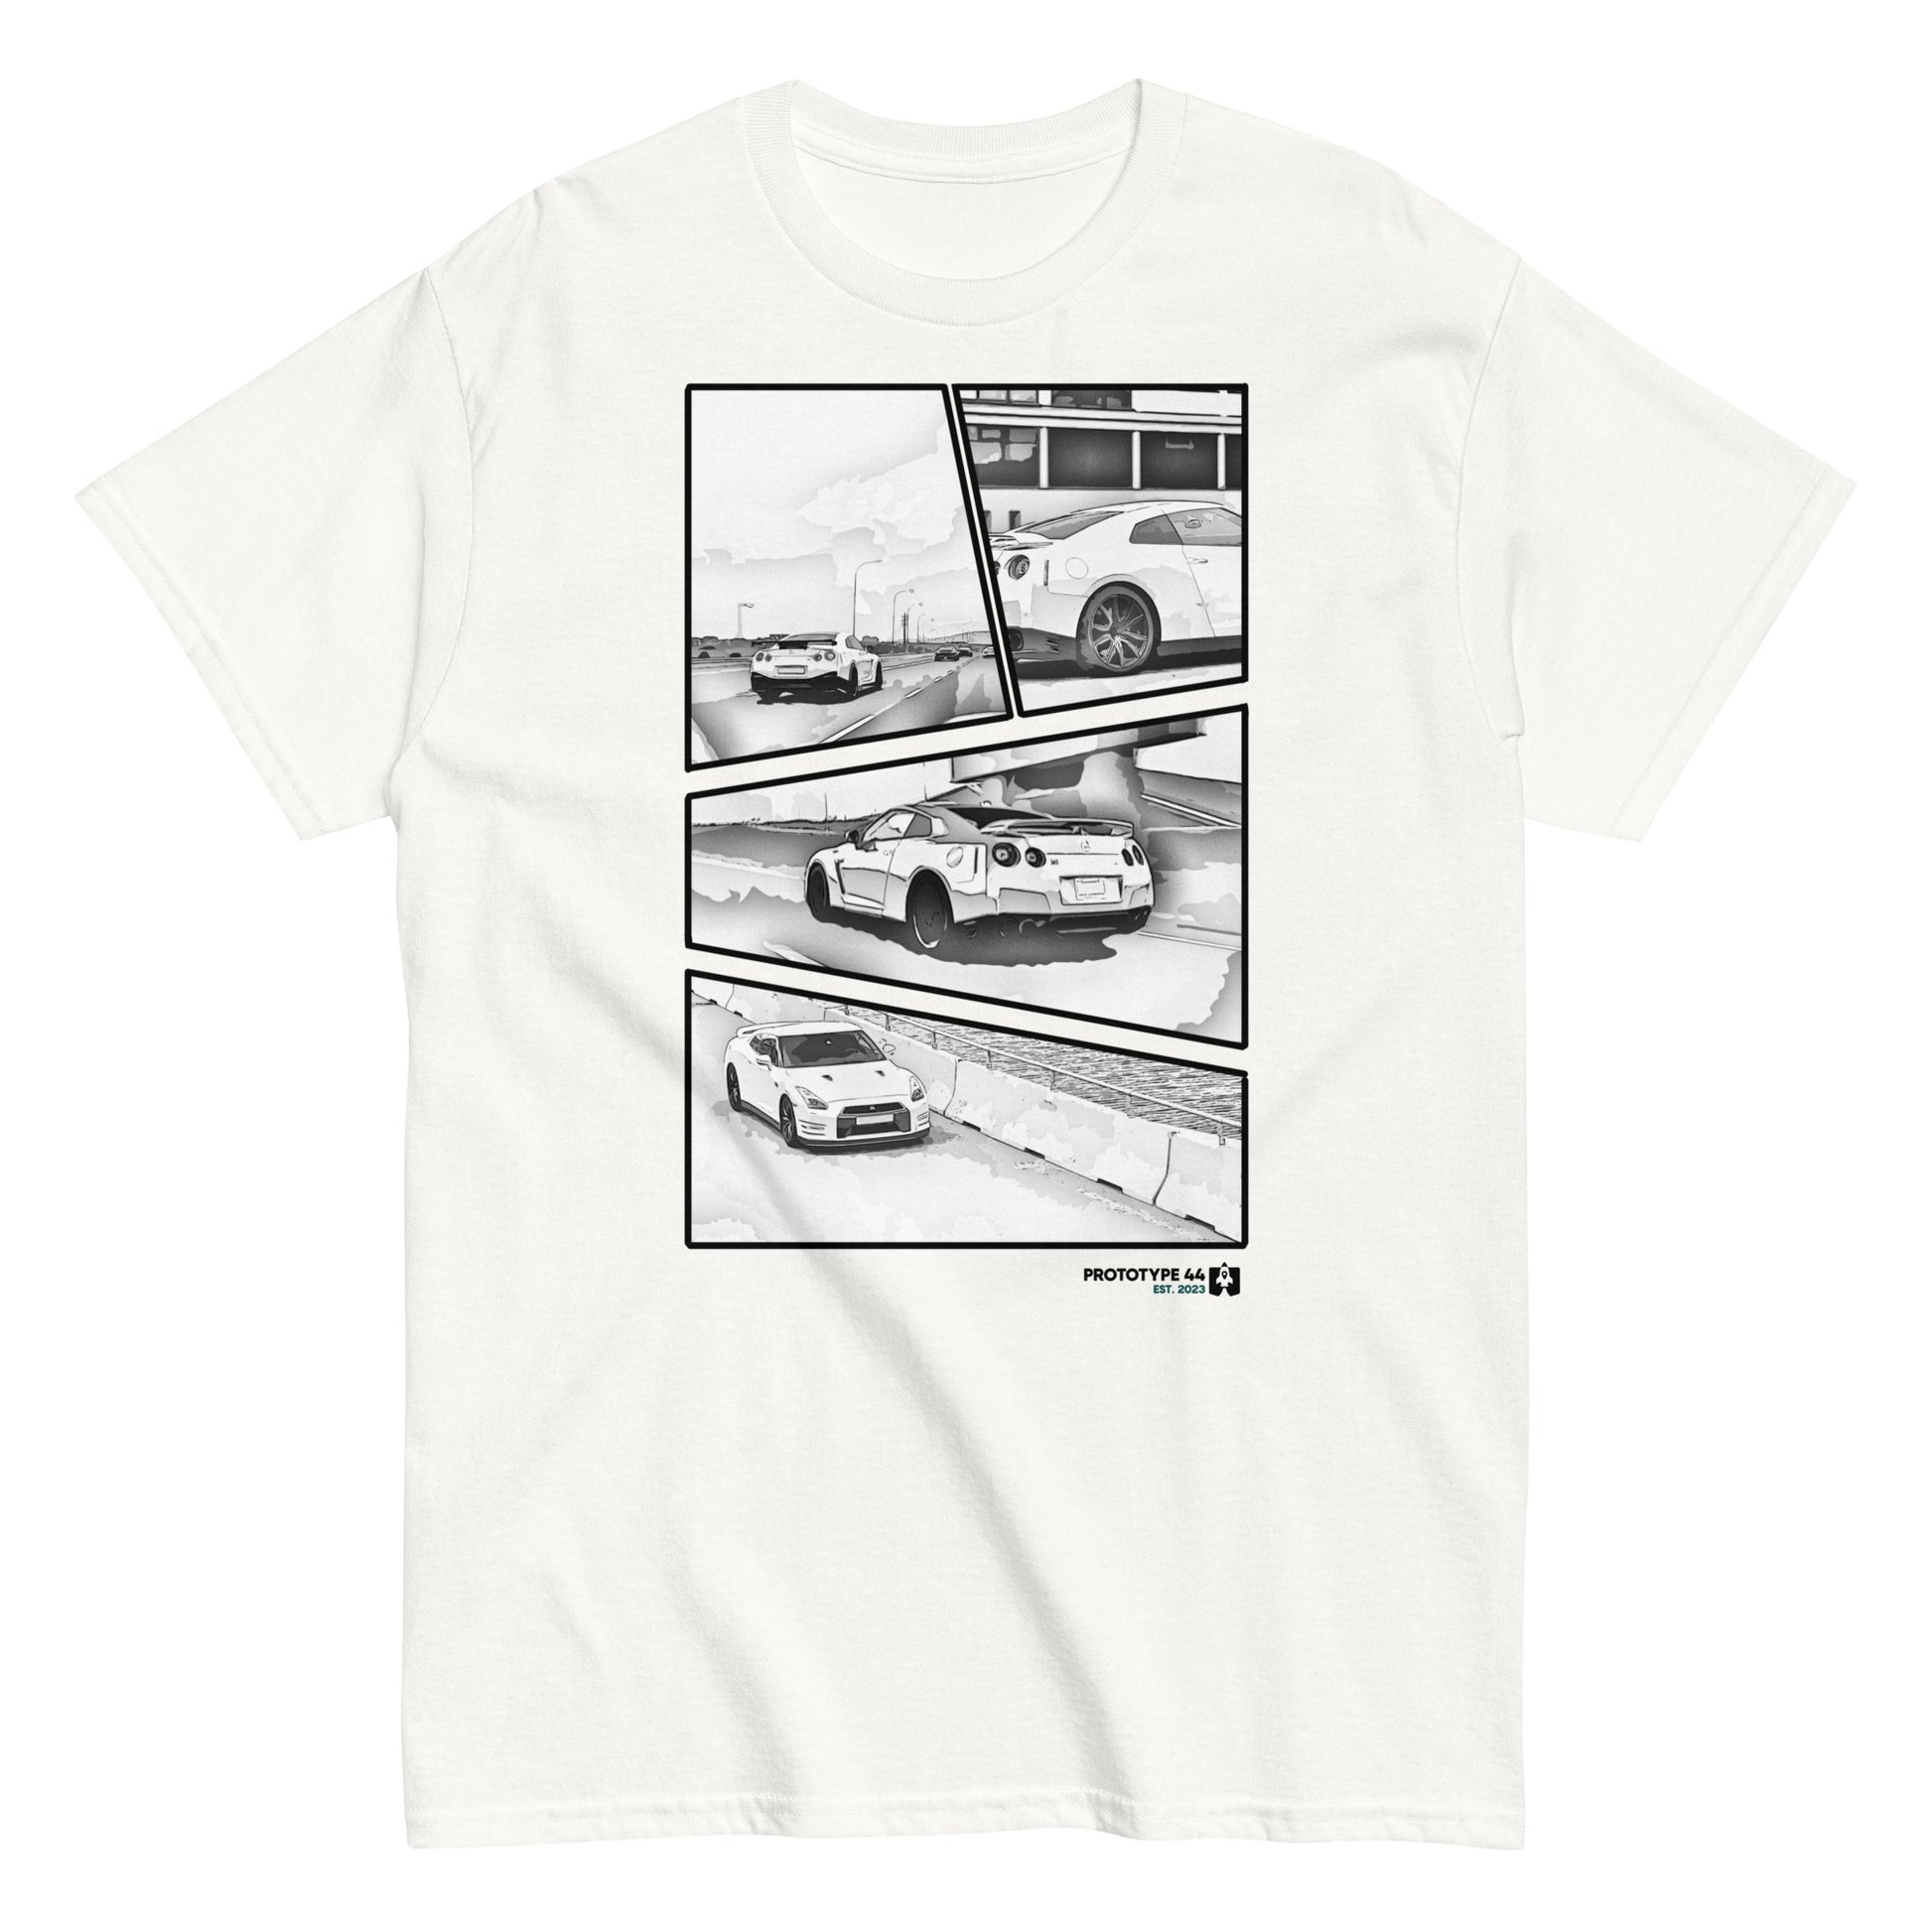 t-shirt on white surface. Manga with 4 panels. Multiple views of Nissan R35 GTR exterior on road and near structure.